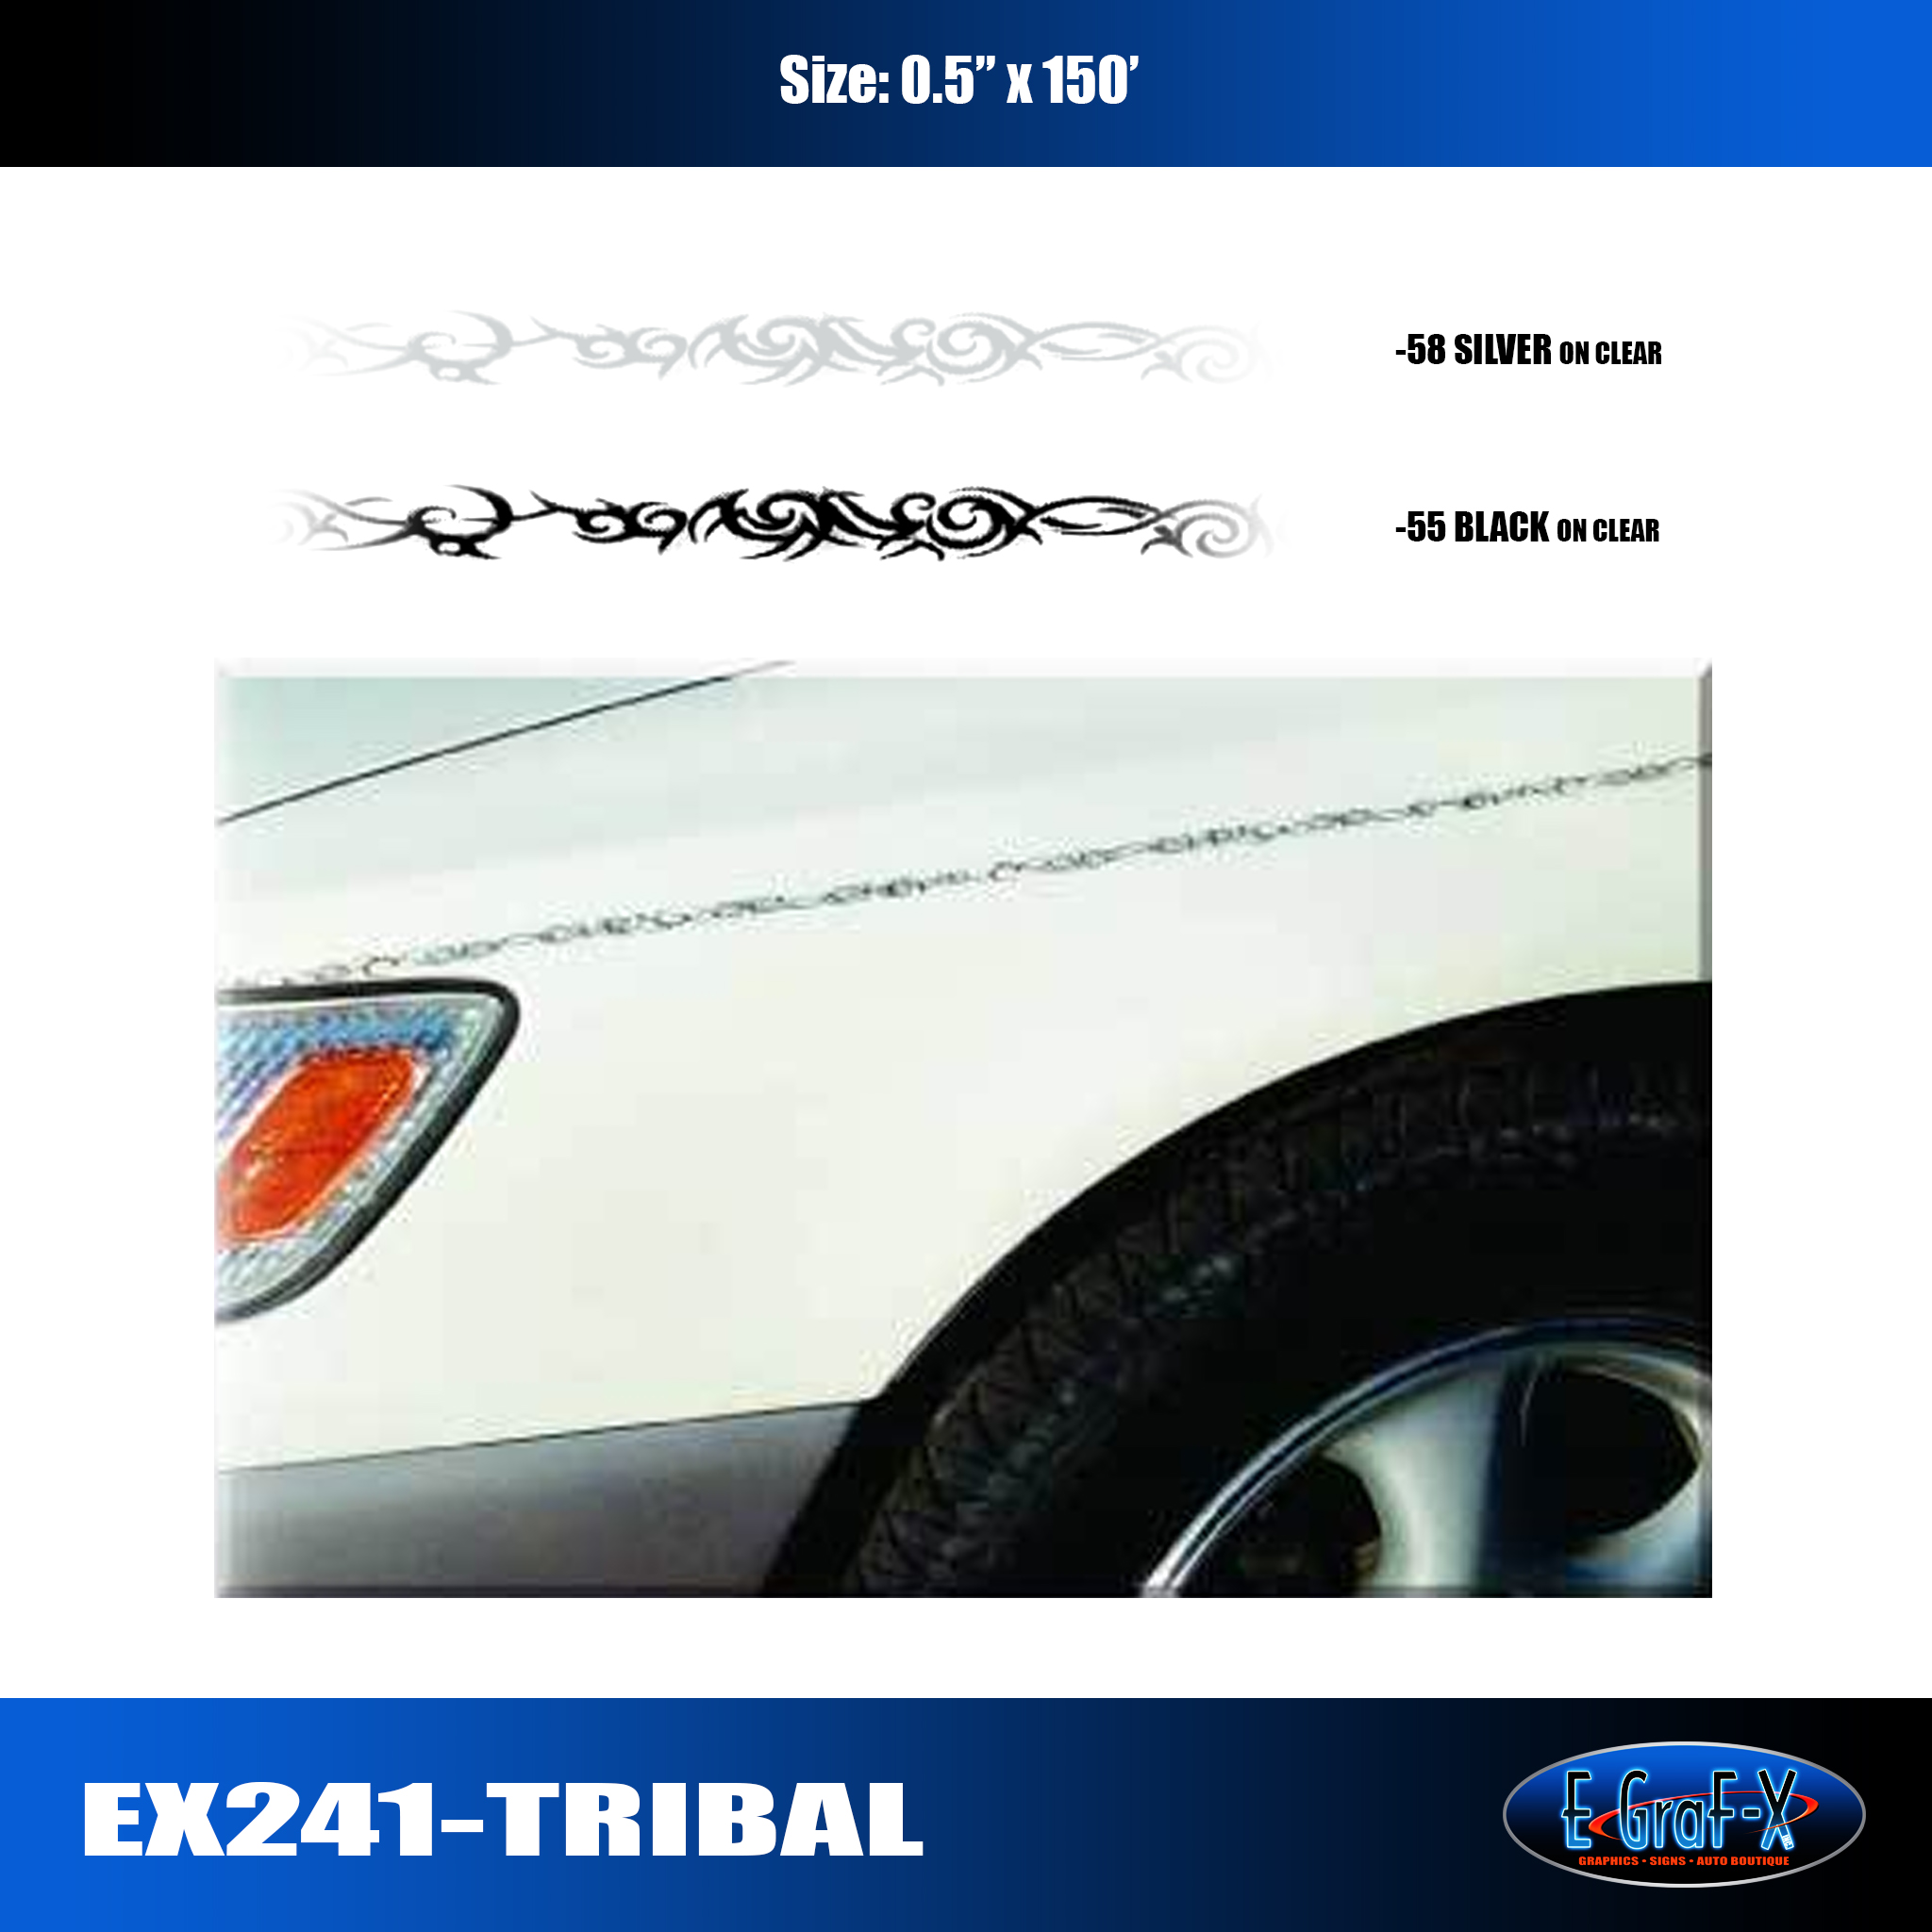 TRIBAL ACCENT PIN STRIPE CAR TRUCK SIDE GRAPHIC DECAL VINYL STICKER